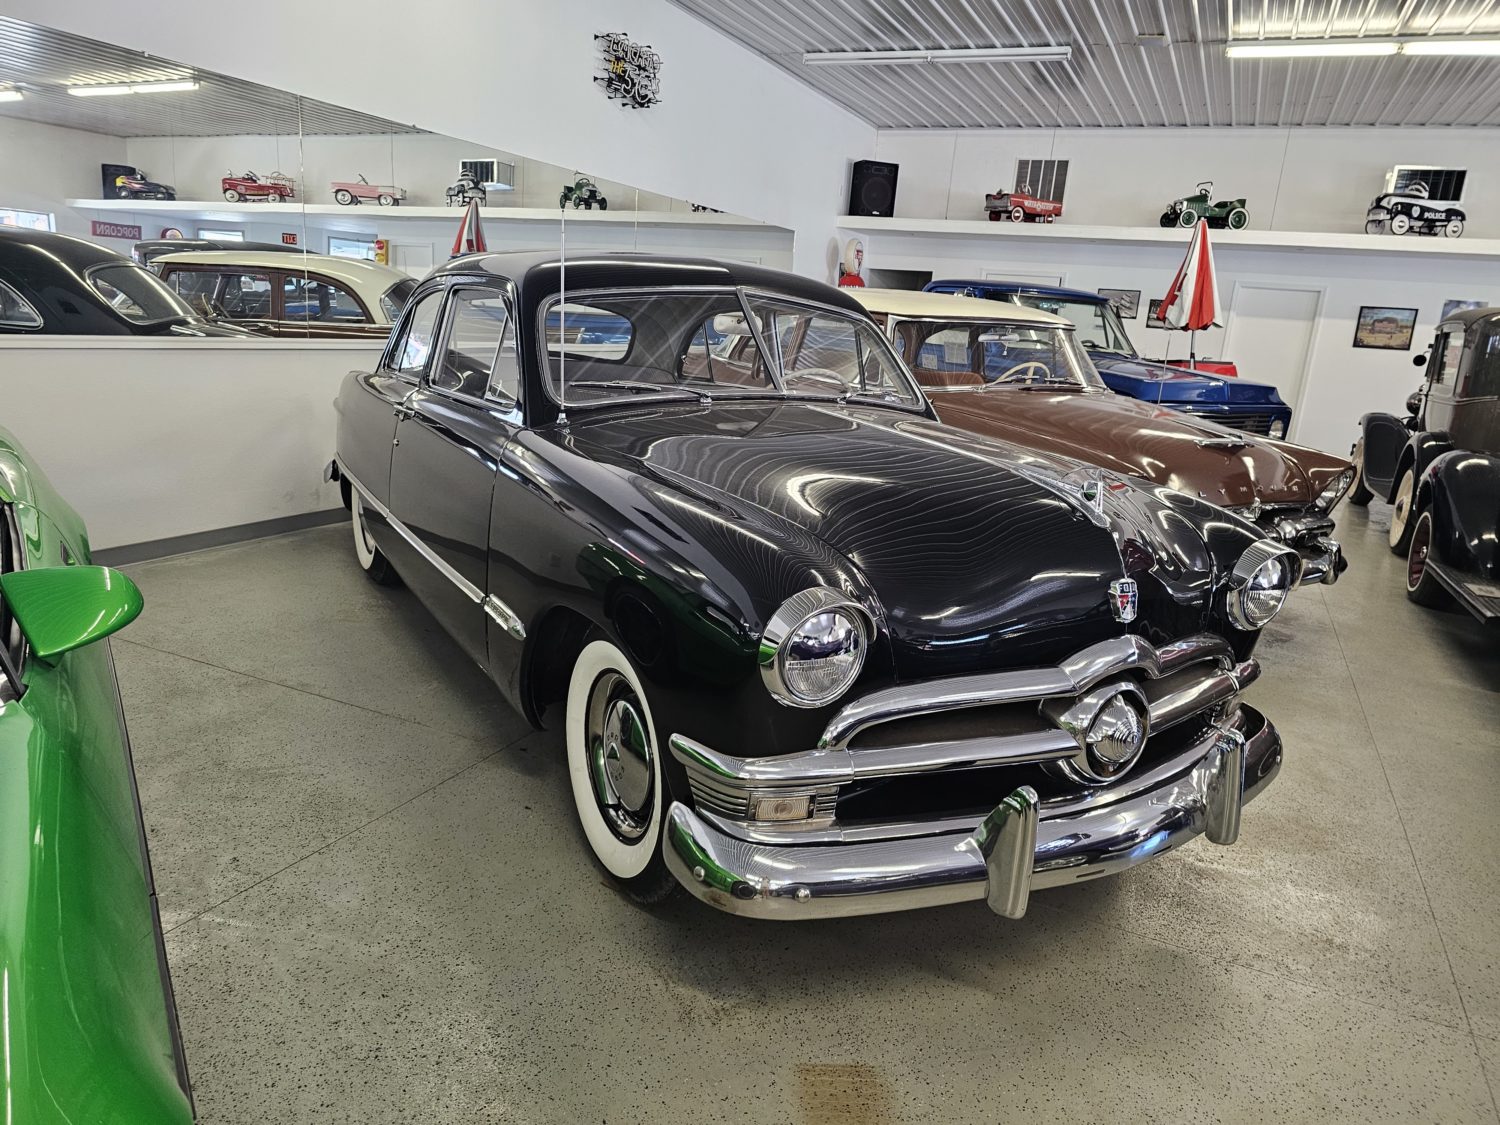 Approx. 100 American Classics Cars At Auction! The Sorensen Collection-LIVE ONSITE W/ONLINE BIDDING!  - image 7